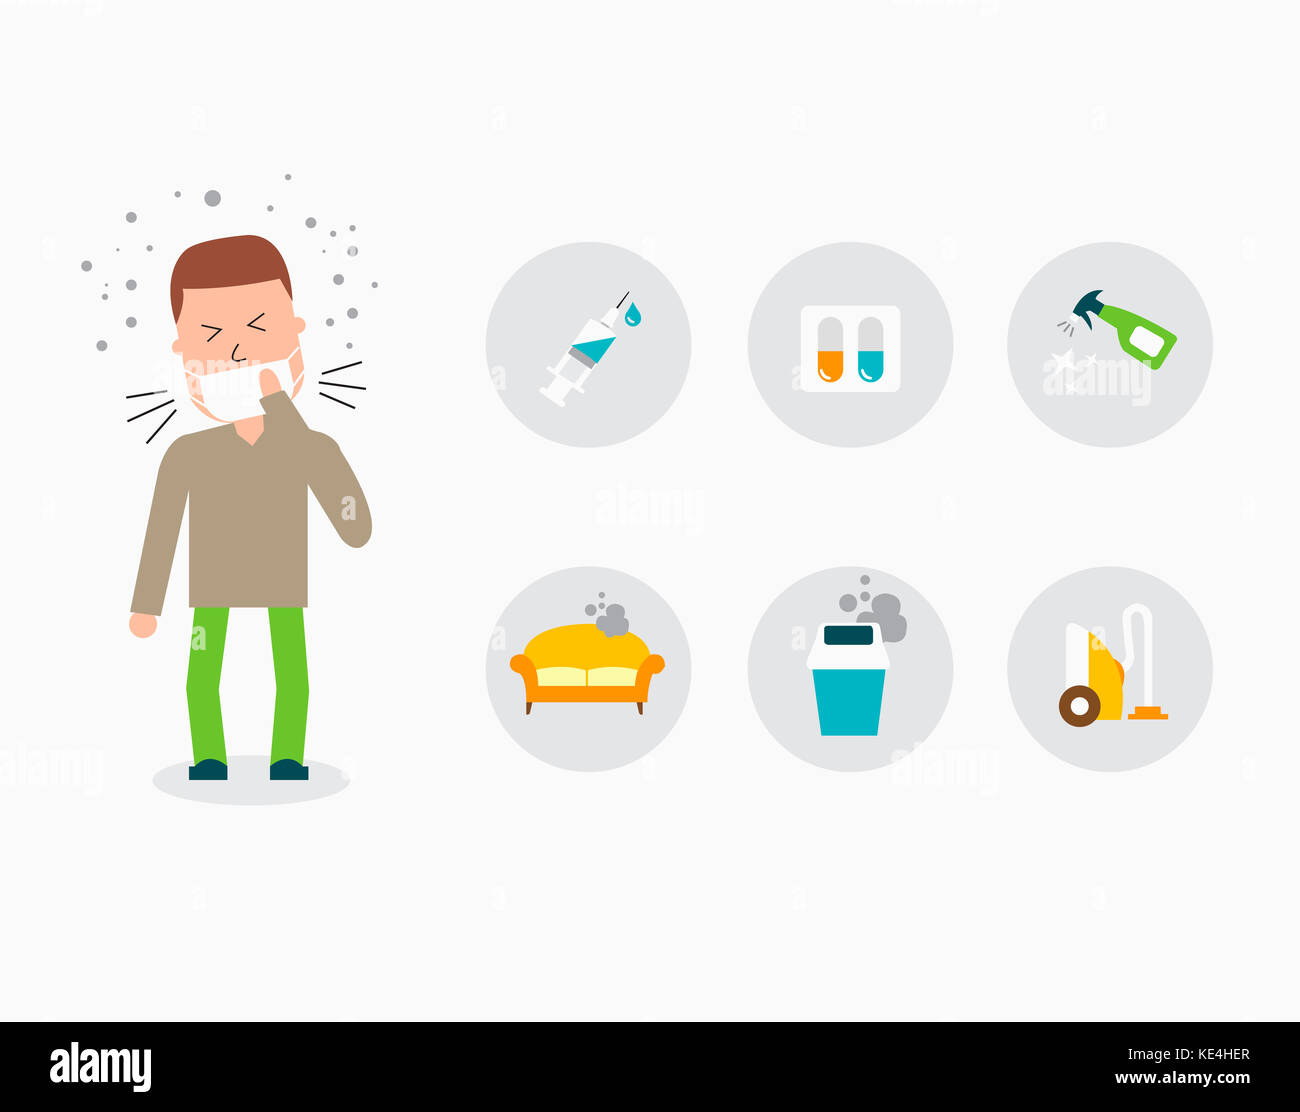 Icons related to fine dust problems Stock Photo